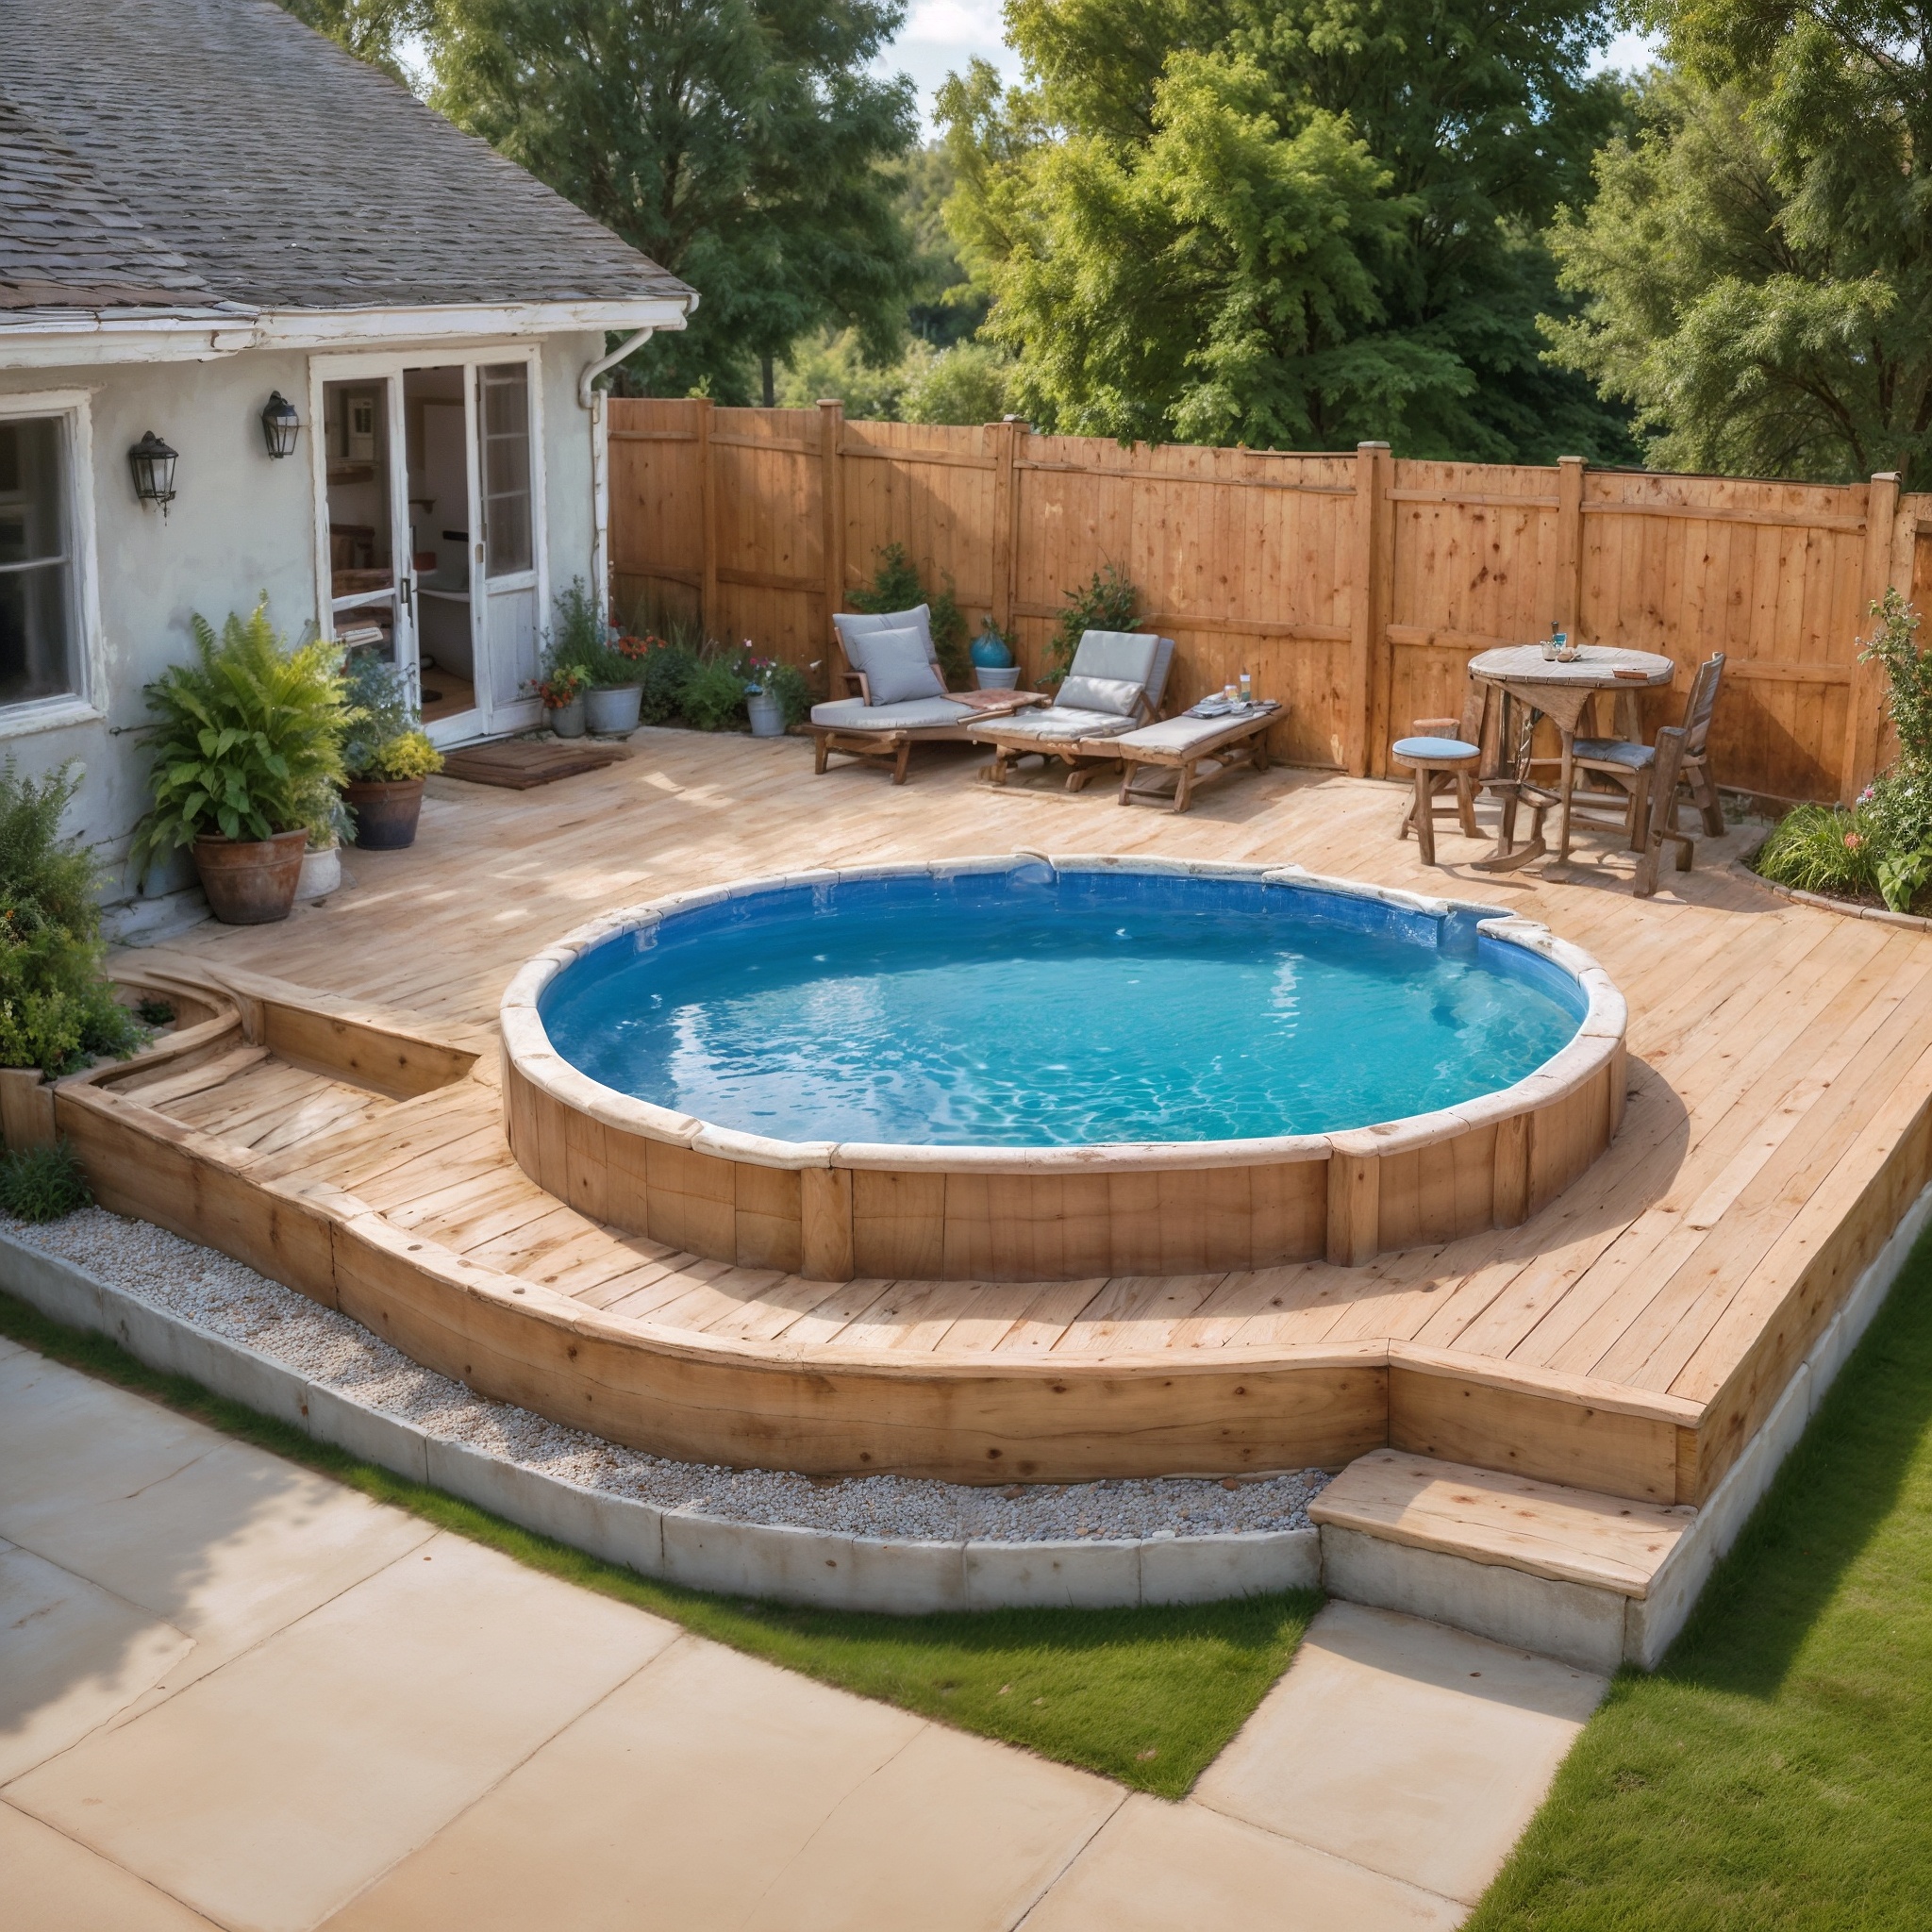 Resin Above-Ground Pool With Raised Deck And Seating Area